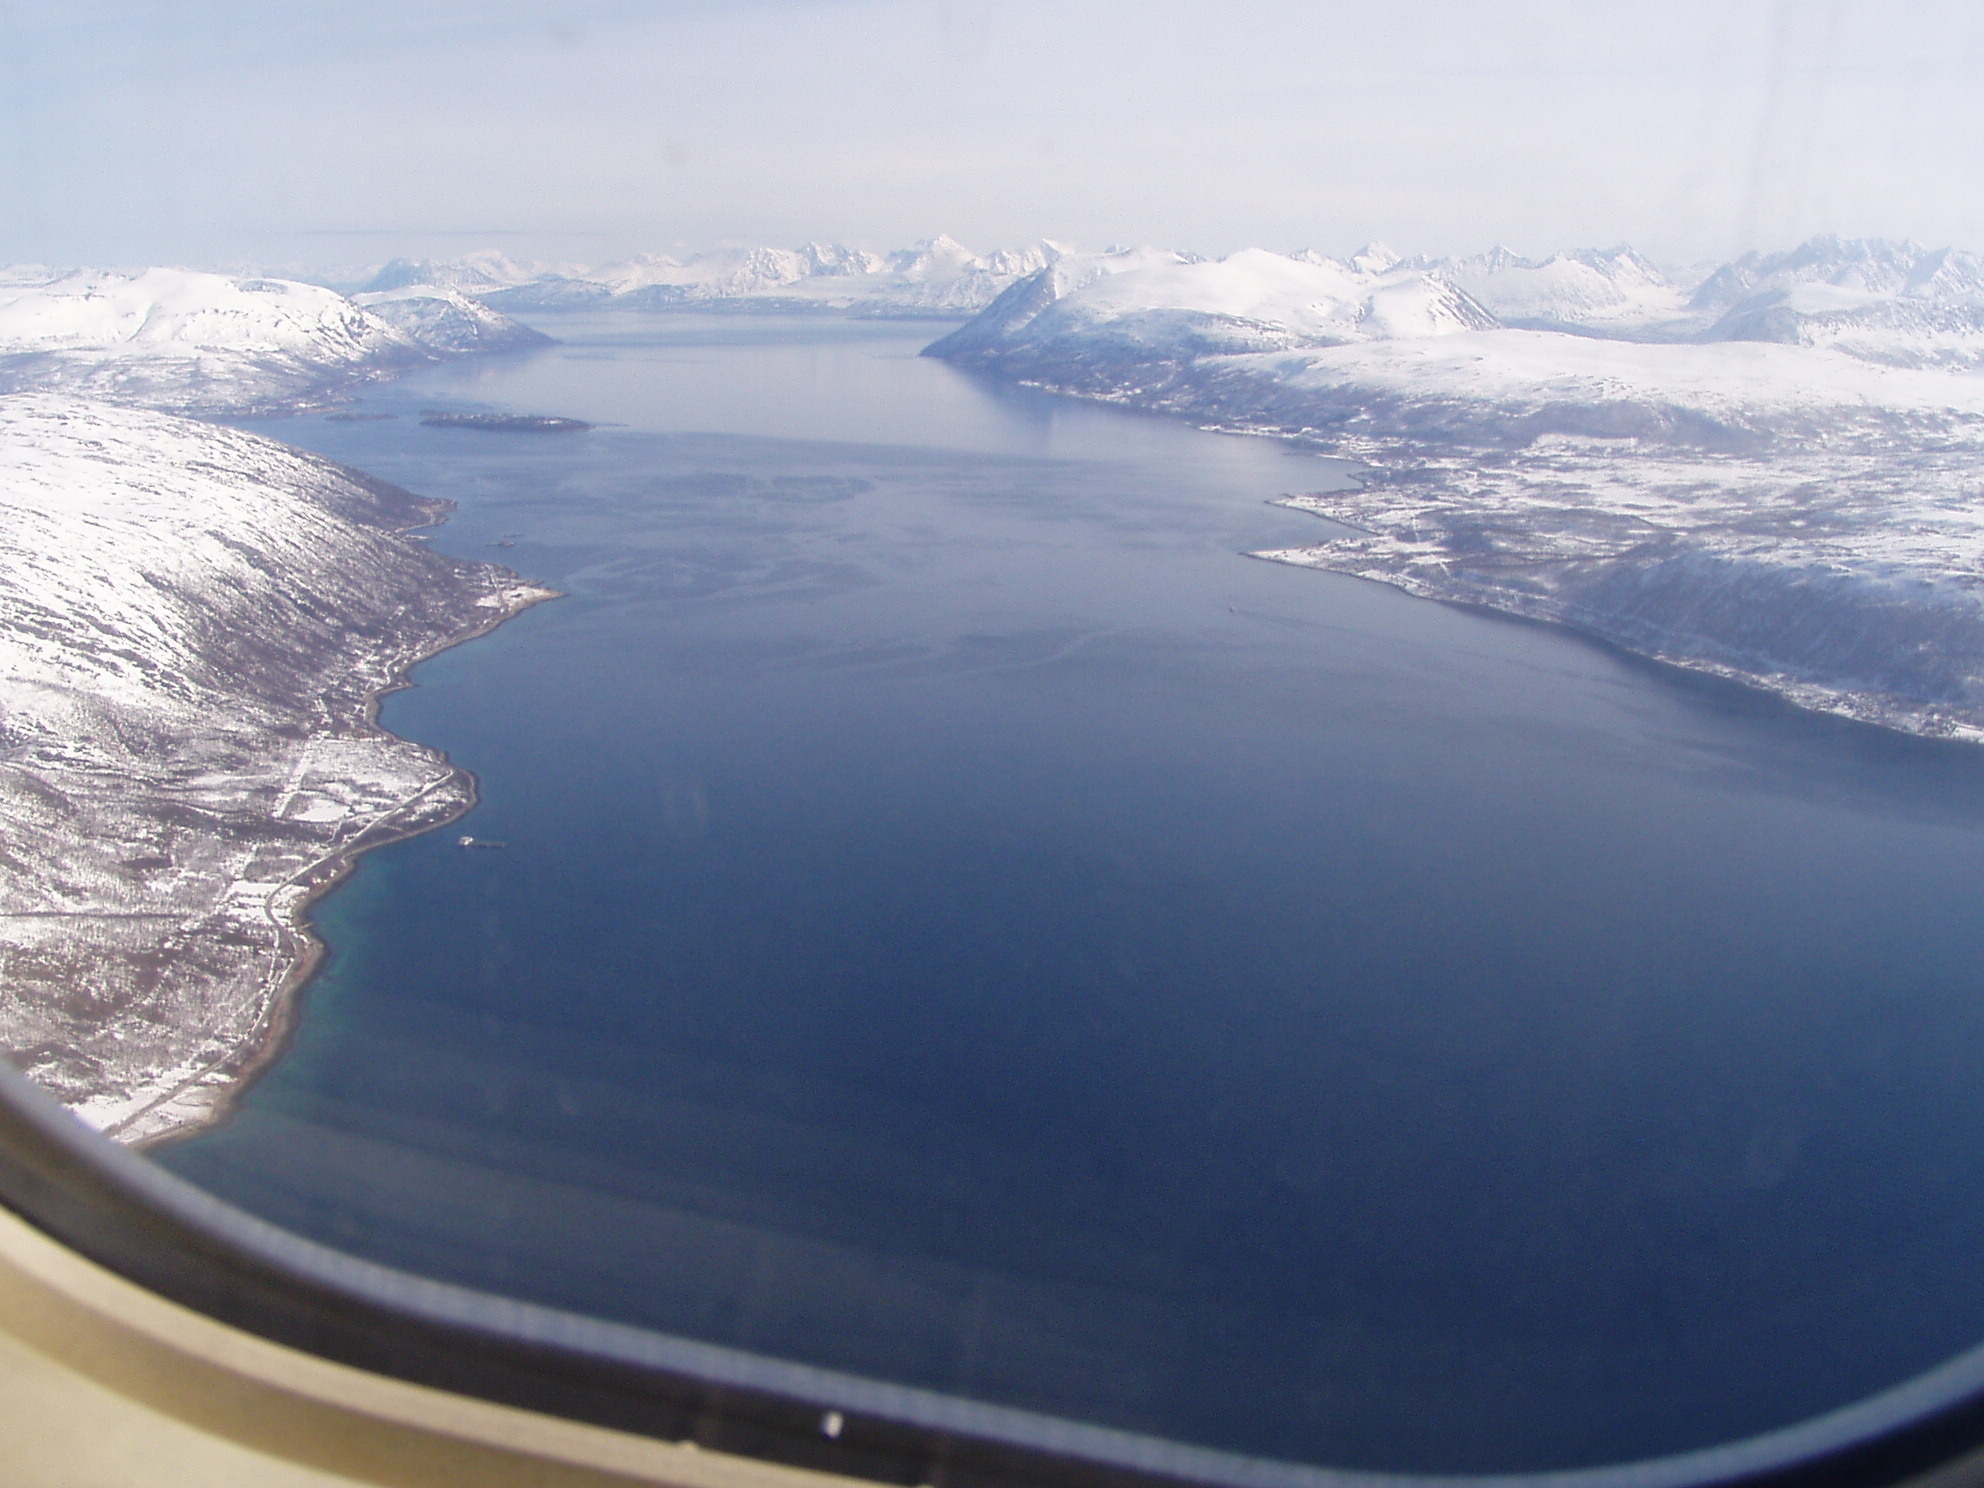 just after take off in Tromsø